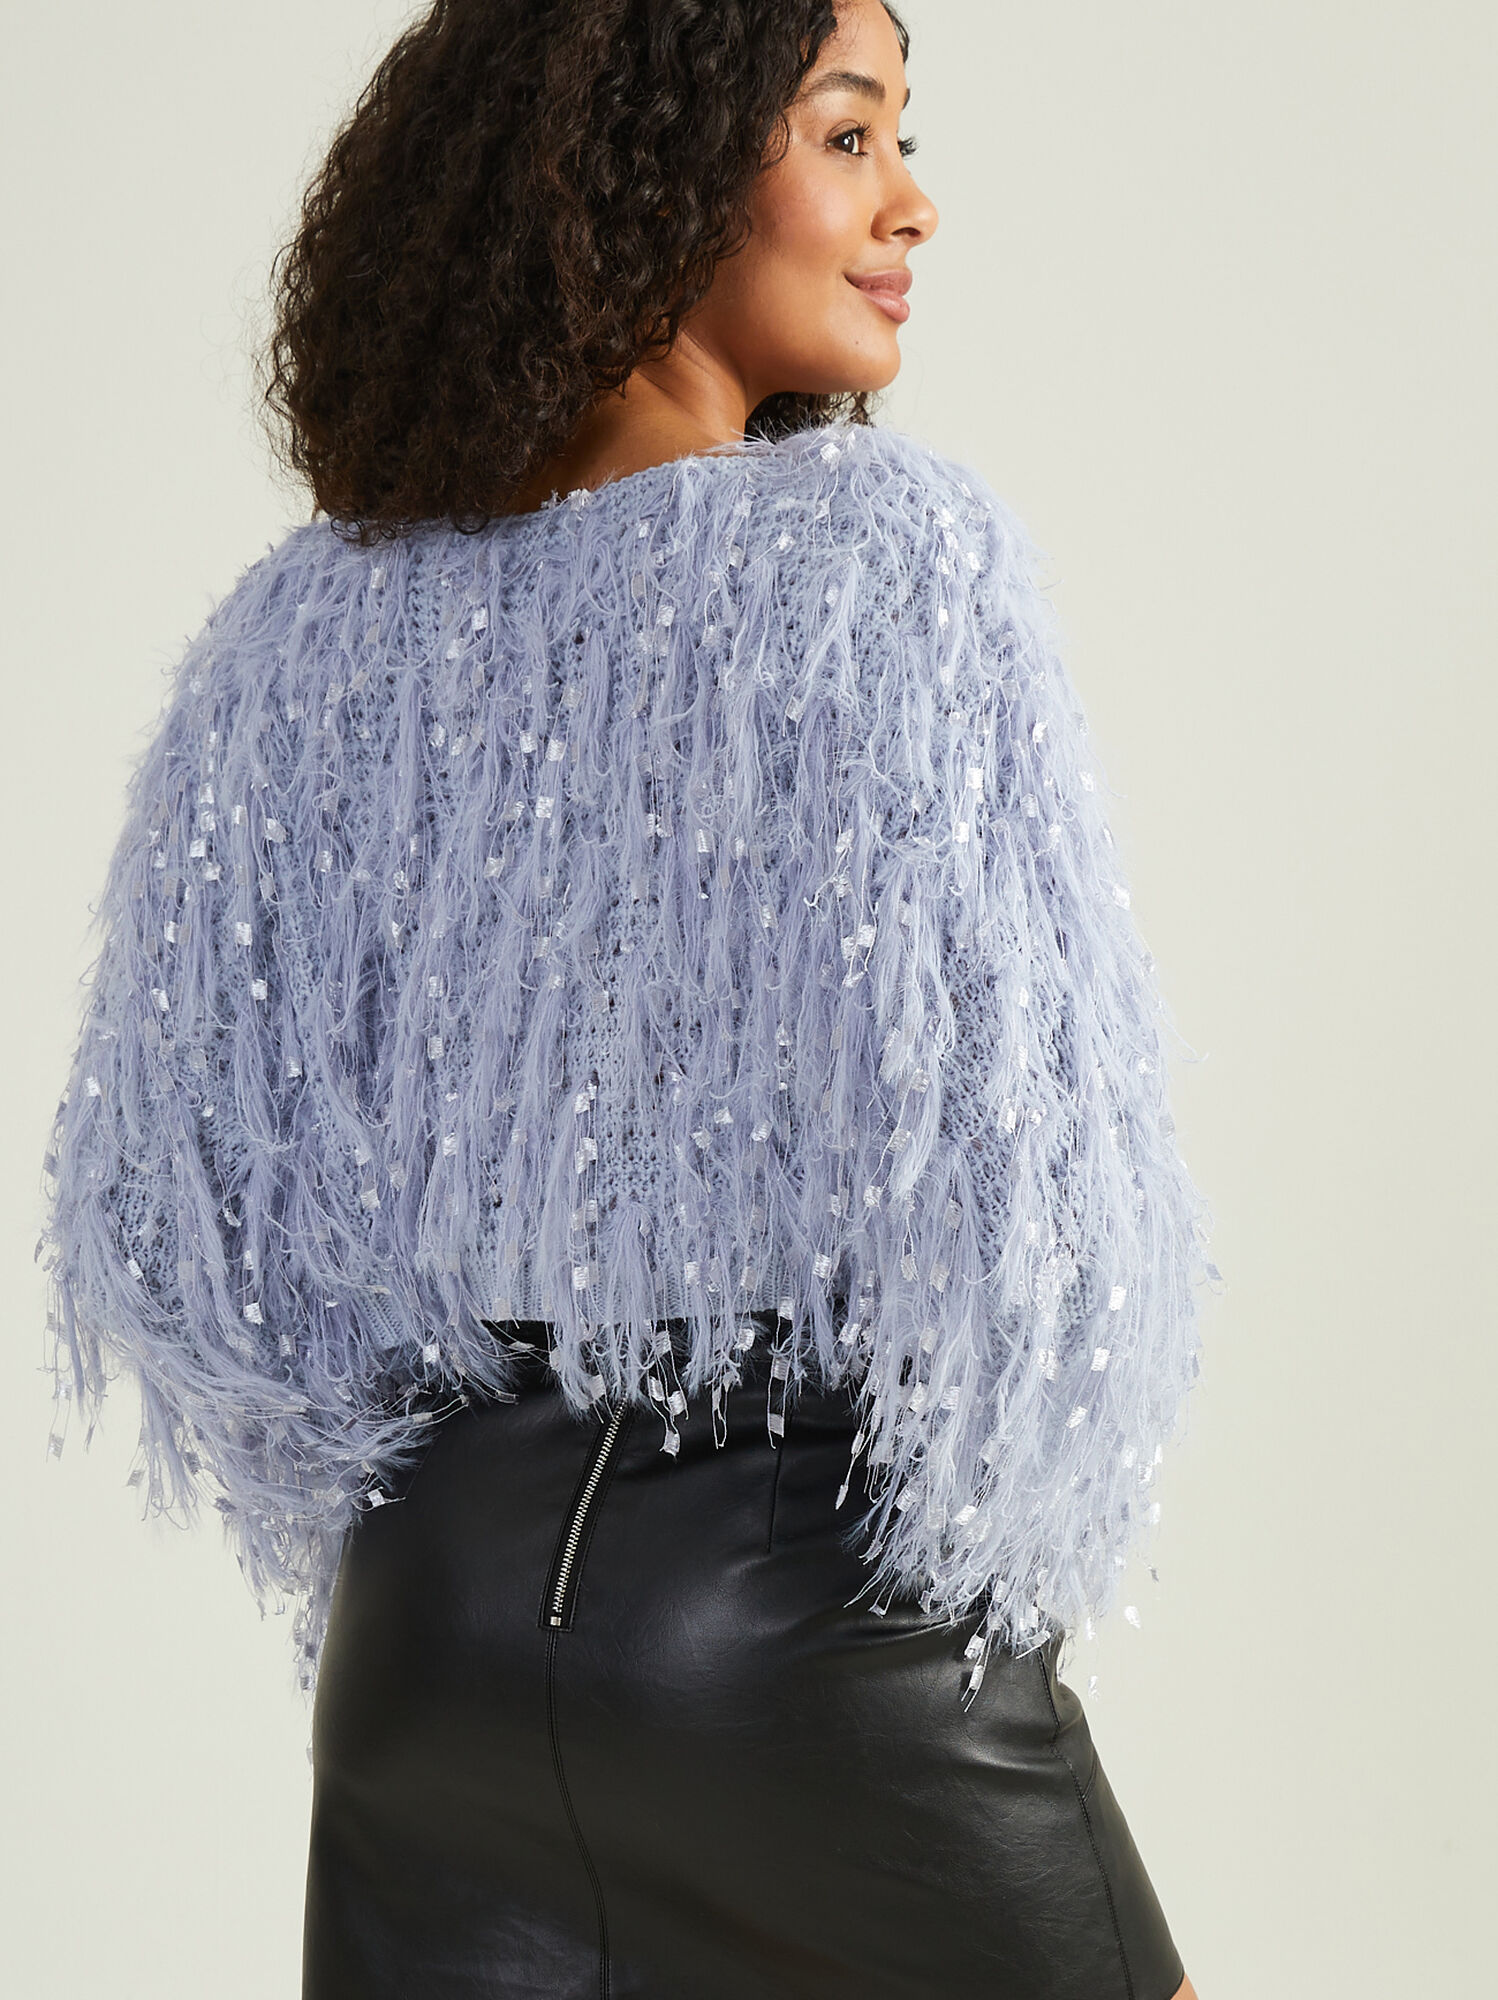 Emaline Cropped Shaggy Sweater